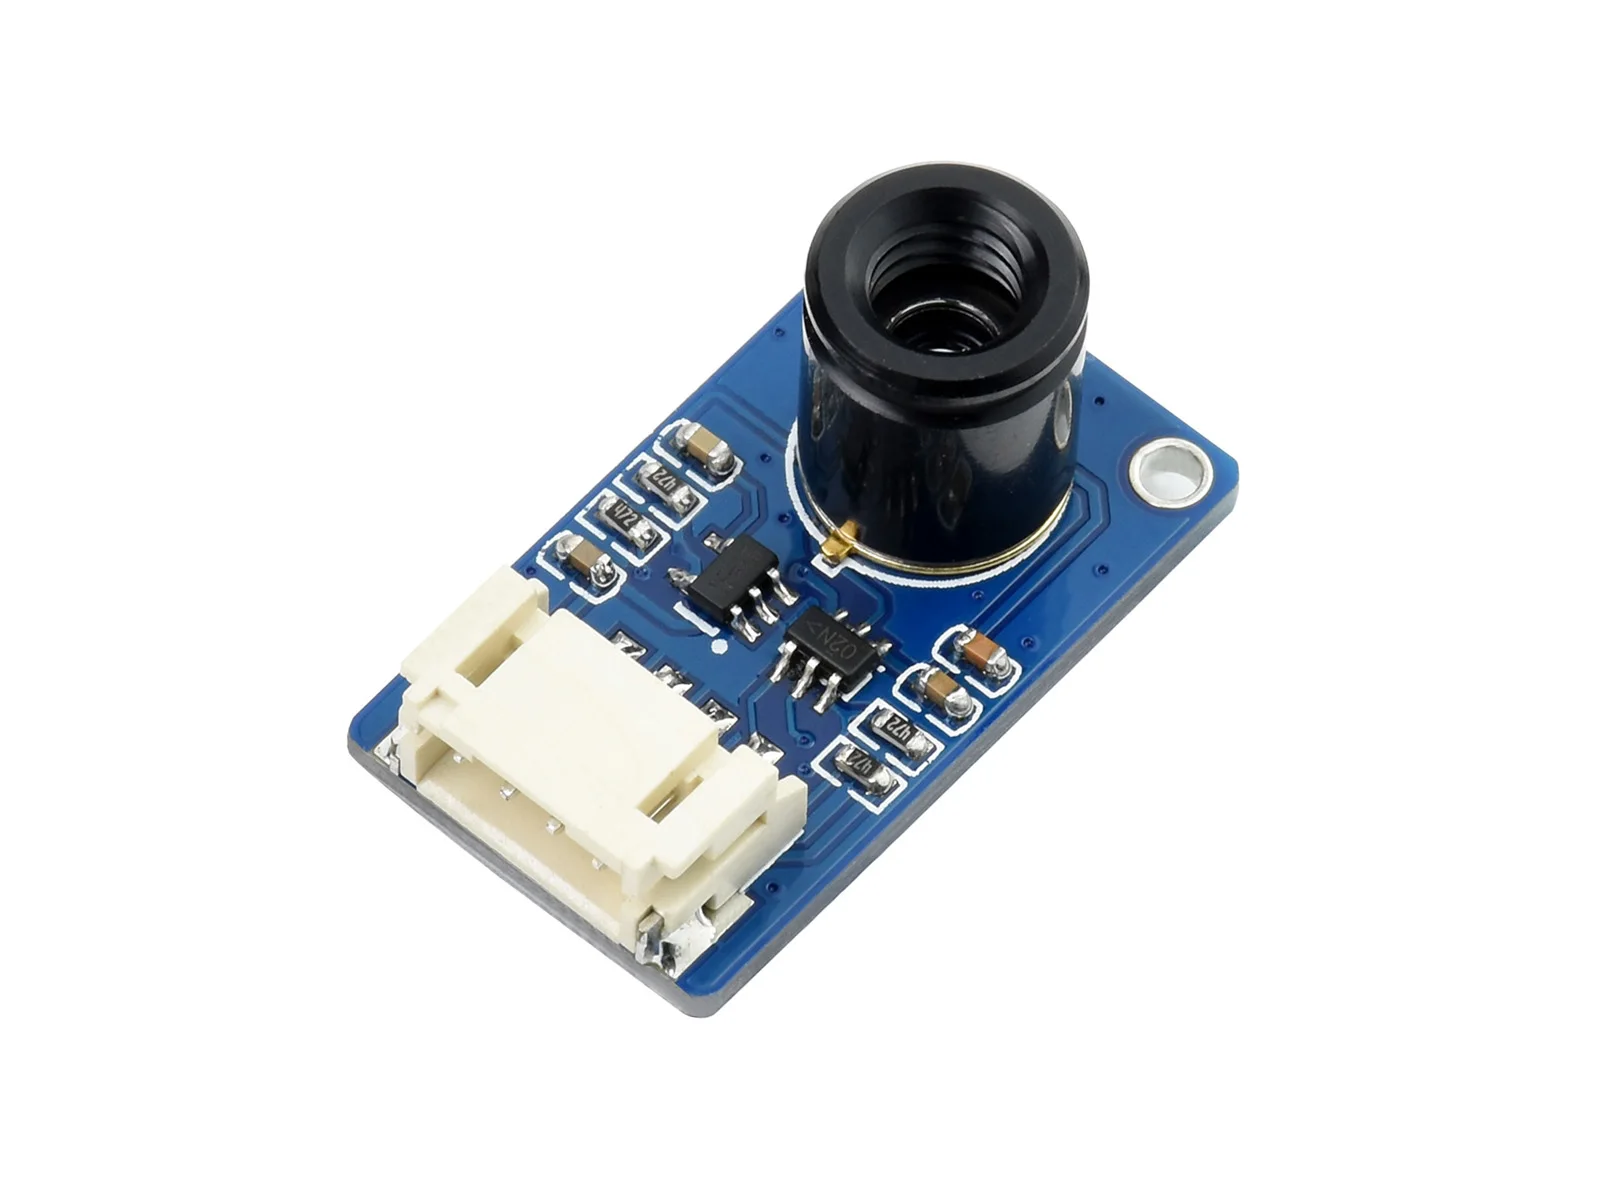 MLX90641 infrared thermal imager module, Infrared array temperature sensor, 16 12 pixels, Support I2C interface communication